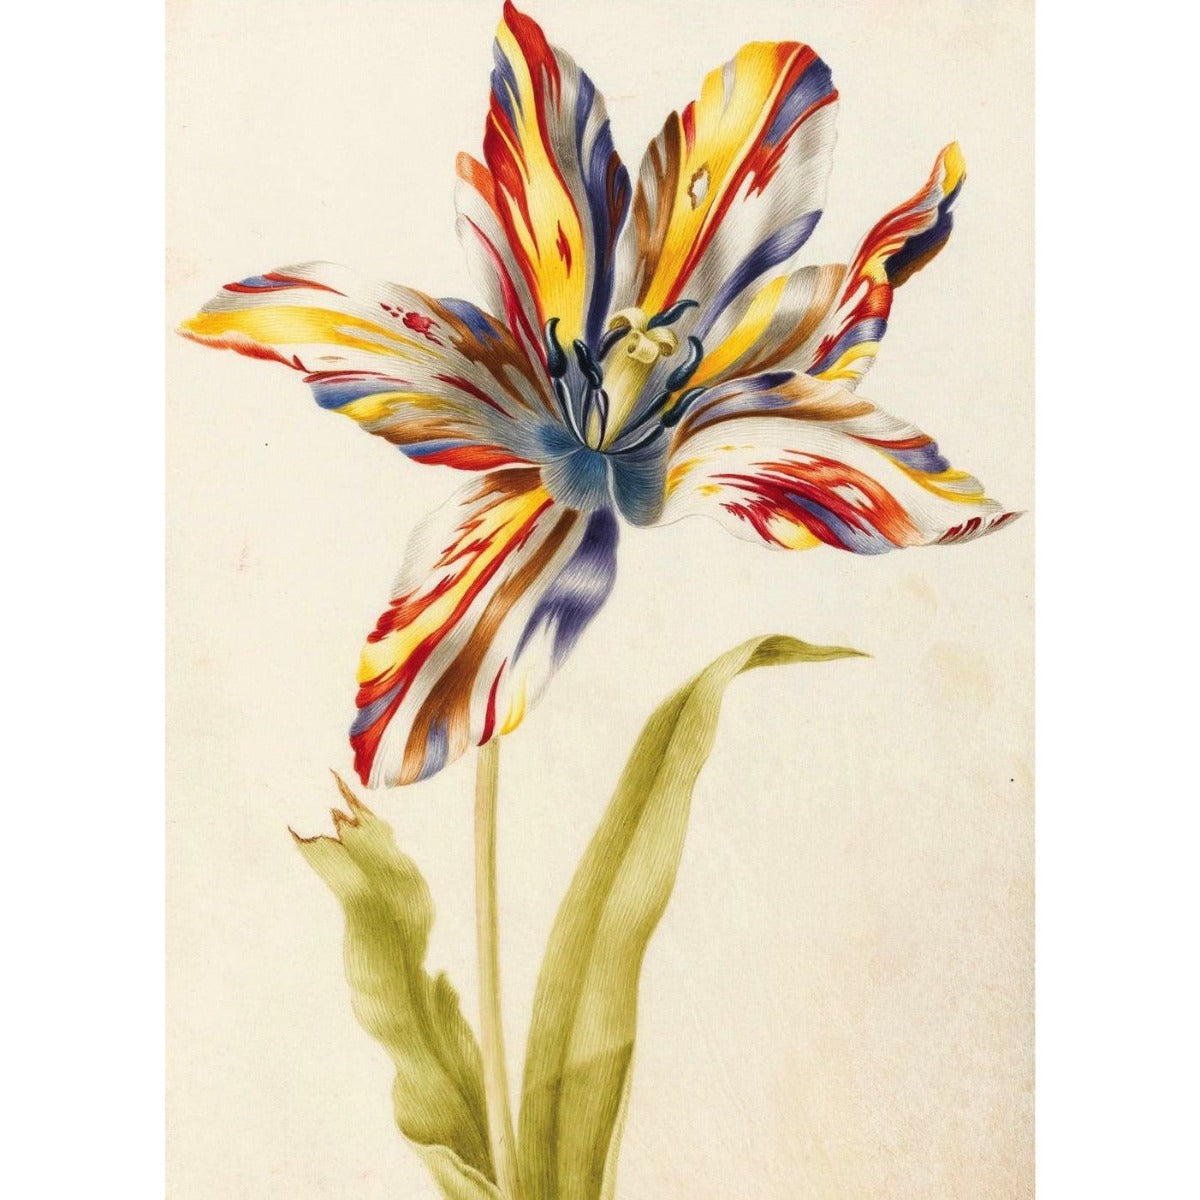 Greeting card - A Multicoloured Broken Tulip by Nicolas Robert. Red, yellow and white striped tulip and stem against a white background. From the collection of The Fitzwilliam Museum, brought to you by CuratingCambridge.com